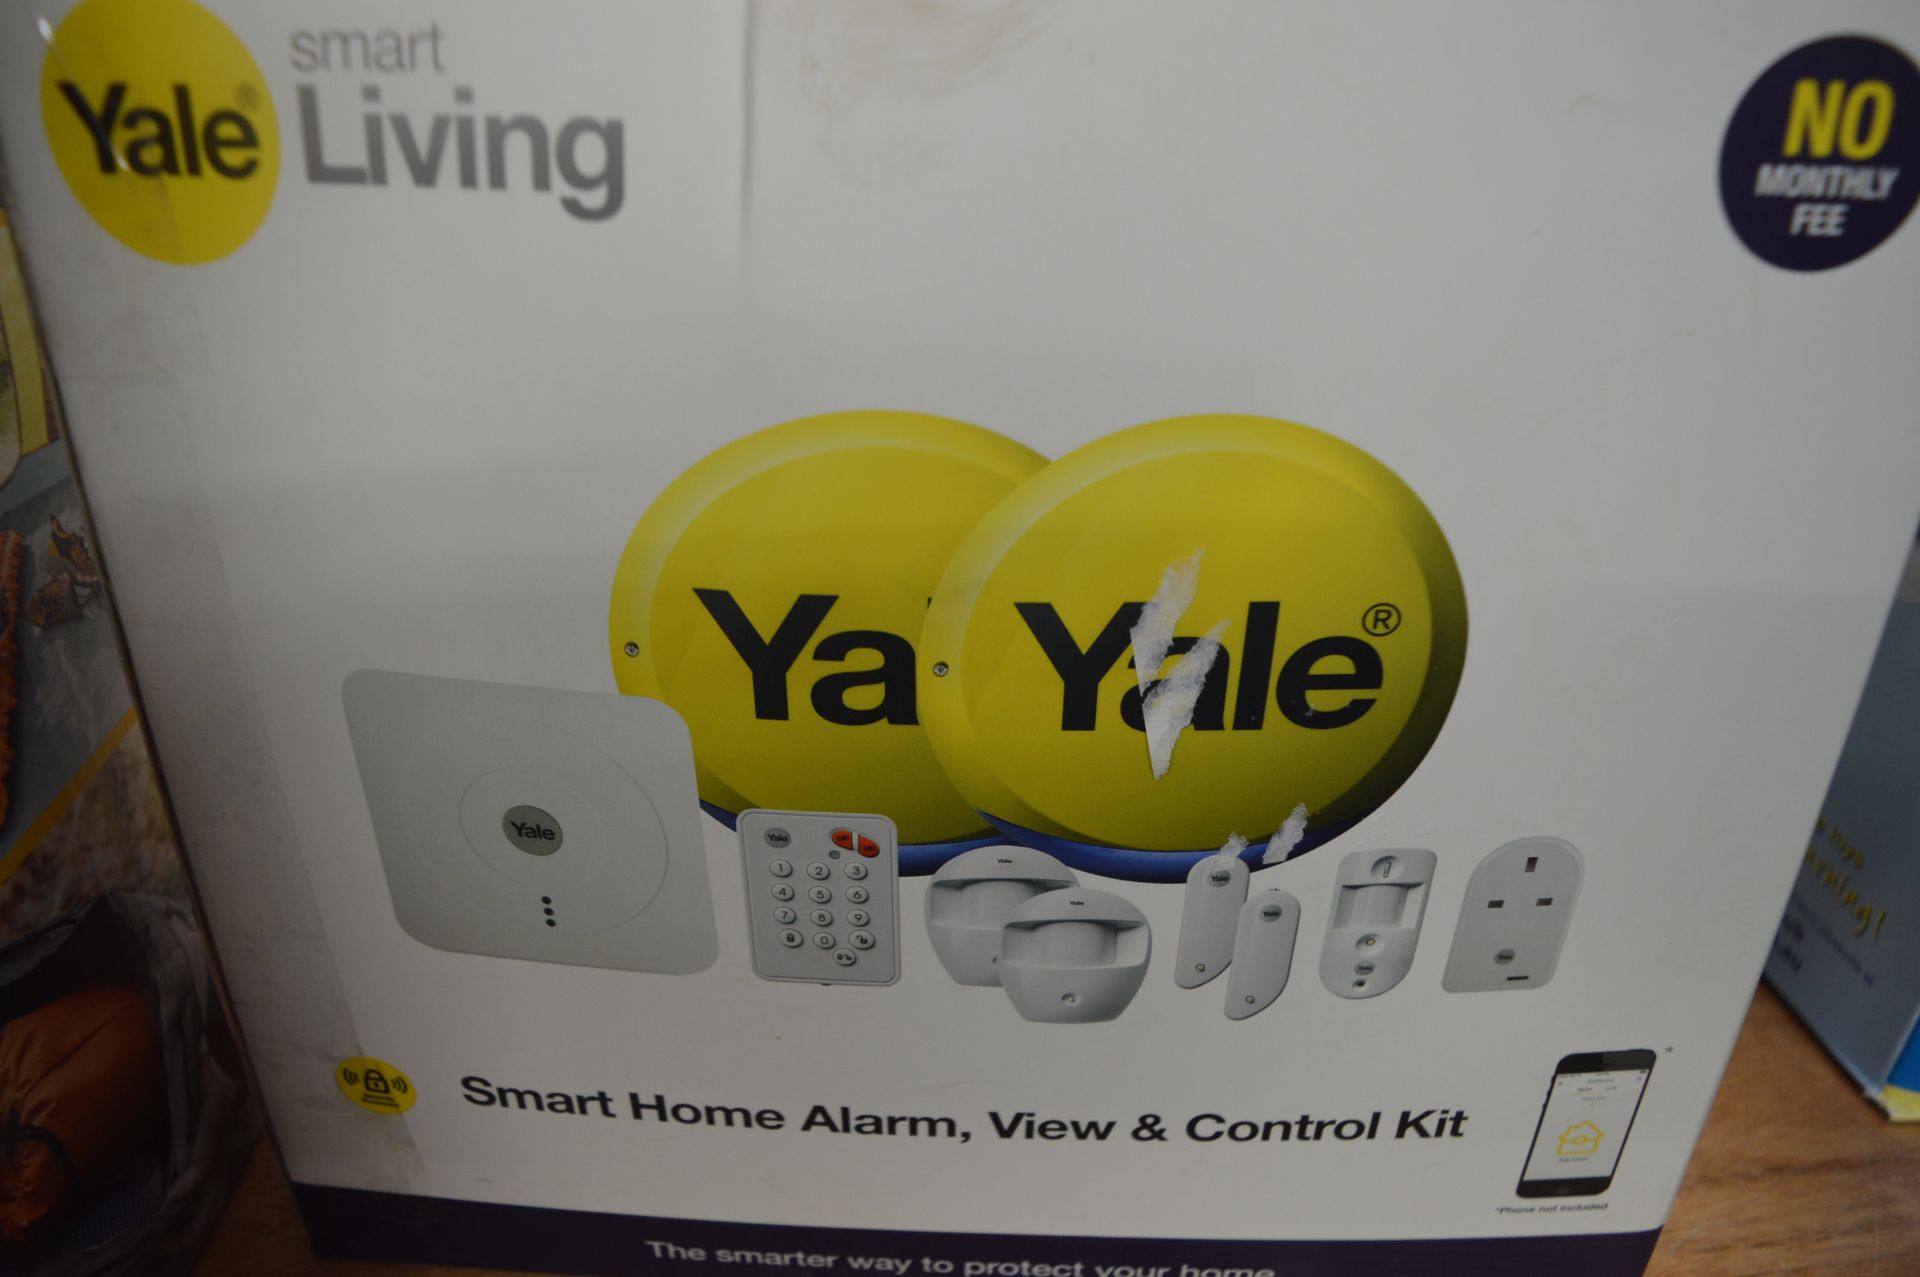 *Yale Smart Living Home Alarm System - Image 2 of 2